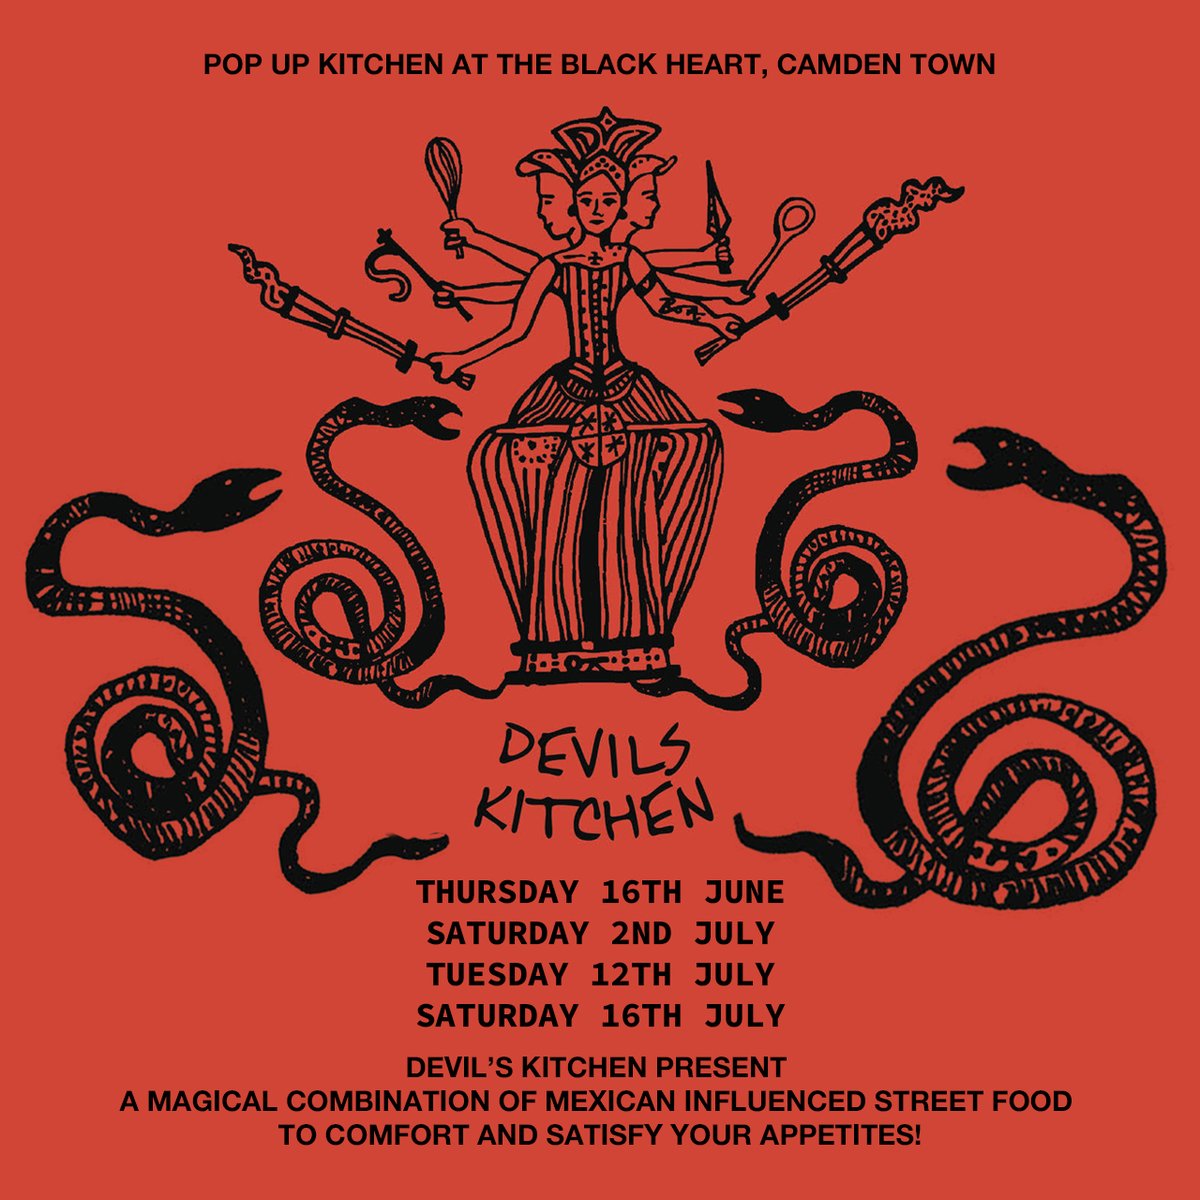 ** IT'S BACK ! ** We’re pumped to put out 4 upcoming special dates where the fabulous DEVIL'S KITCHEN will be popping-back-up in our bar, serving a delicious host of Mexican influenced street-food treats. Mark the dates and get on down for top eats, heavy music + banging beers